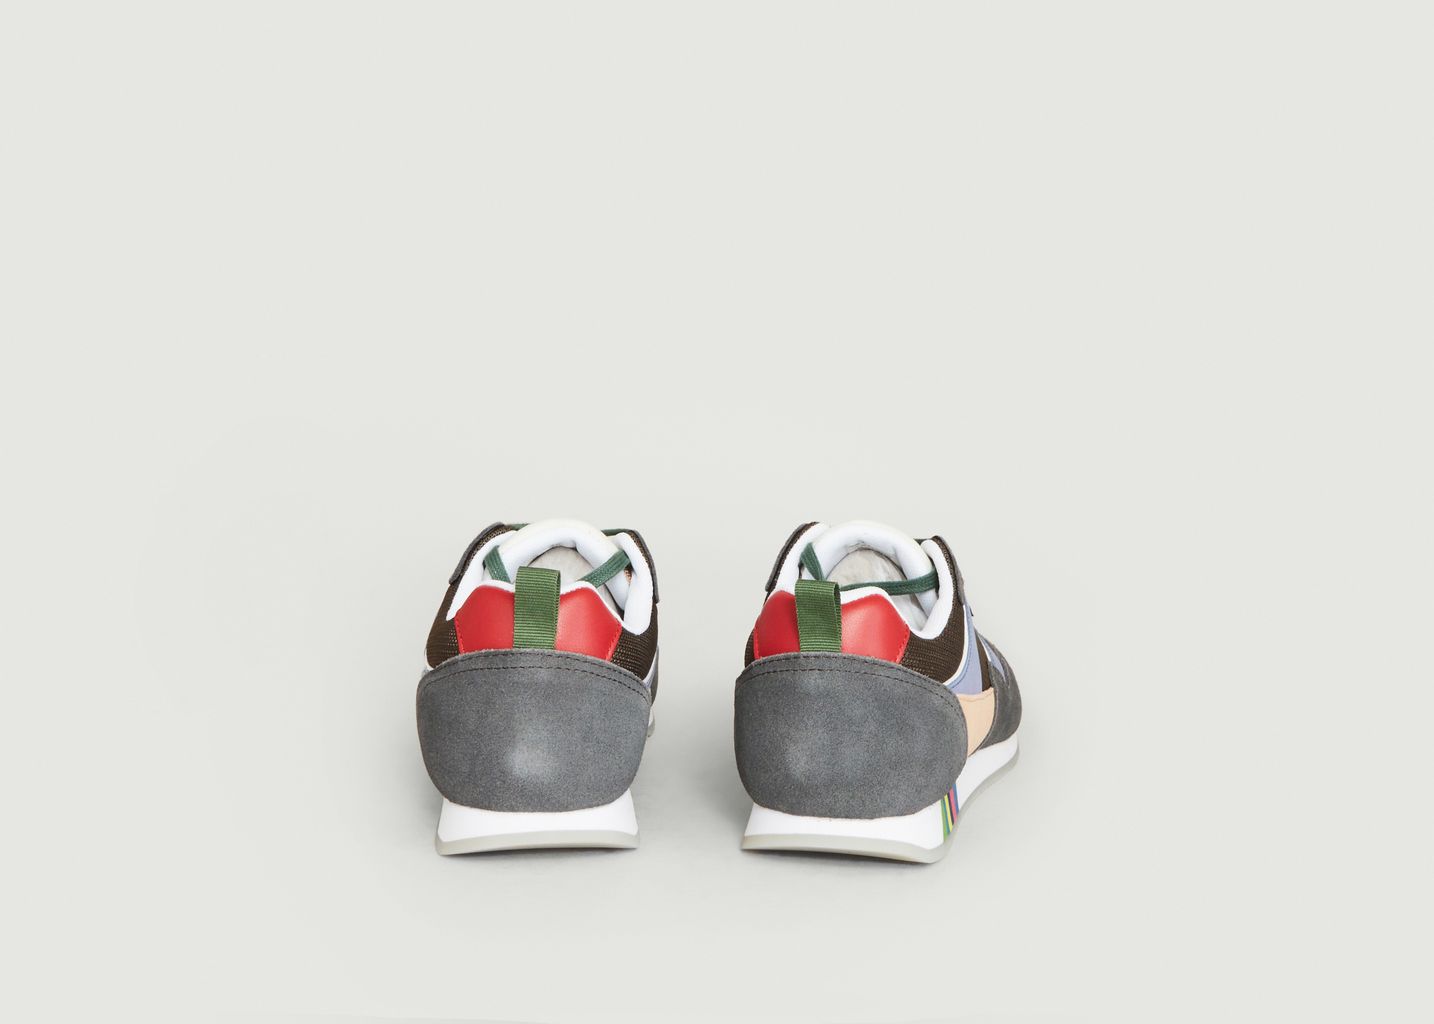 Will sneakers - PS by PAUL SMITH